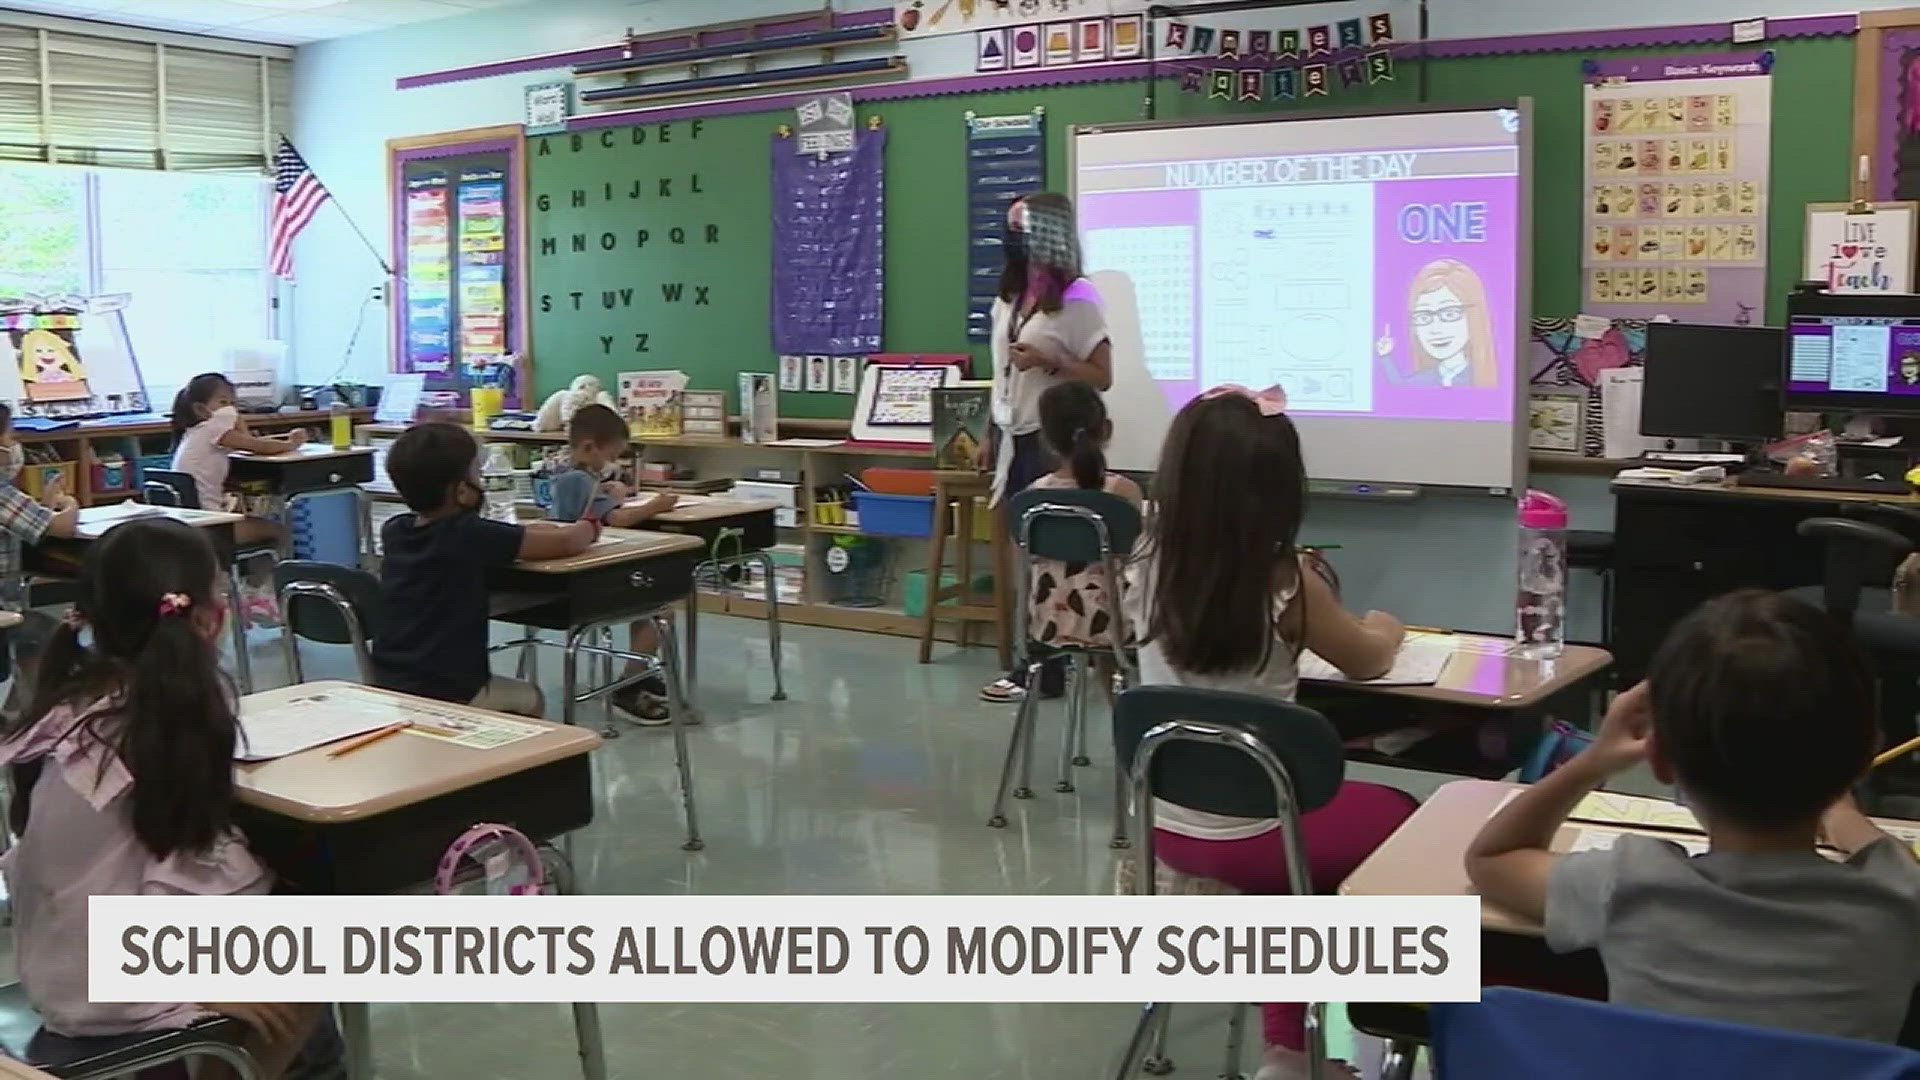 4-day school weeks may be the future for some Pennsylvania school districts thanks to a law passed late last year.